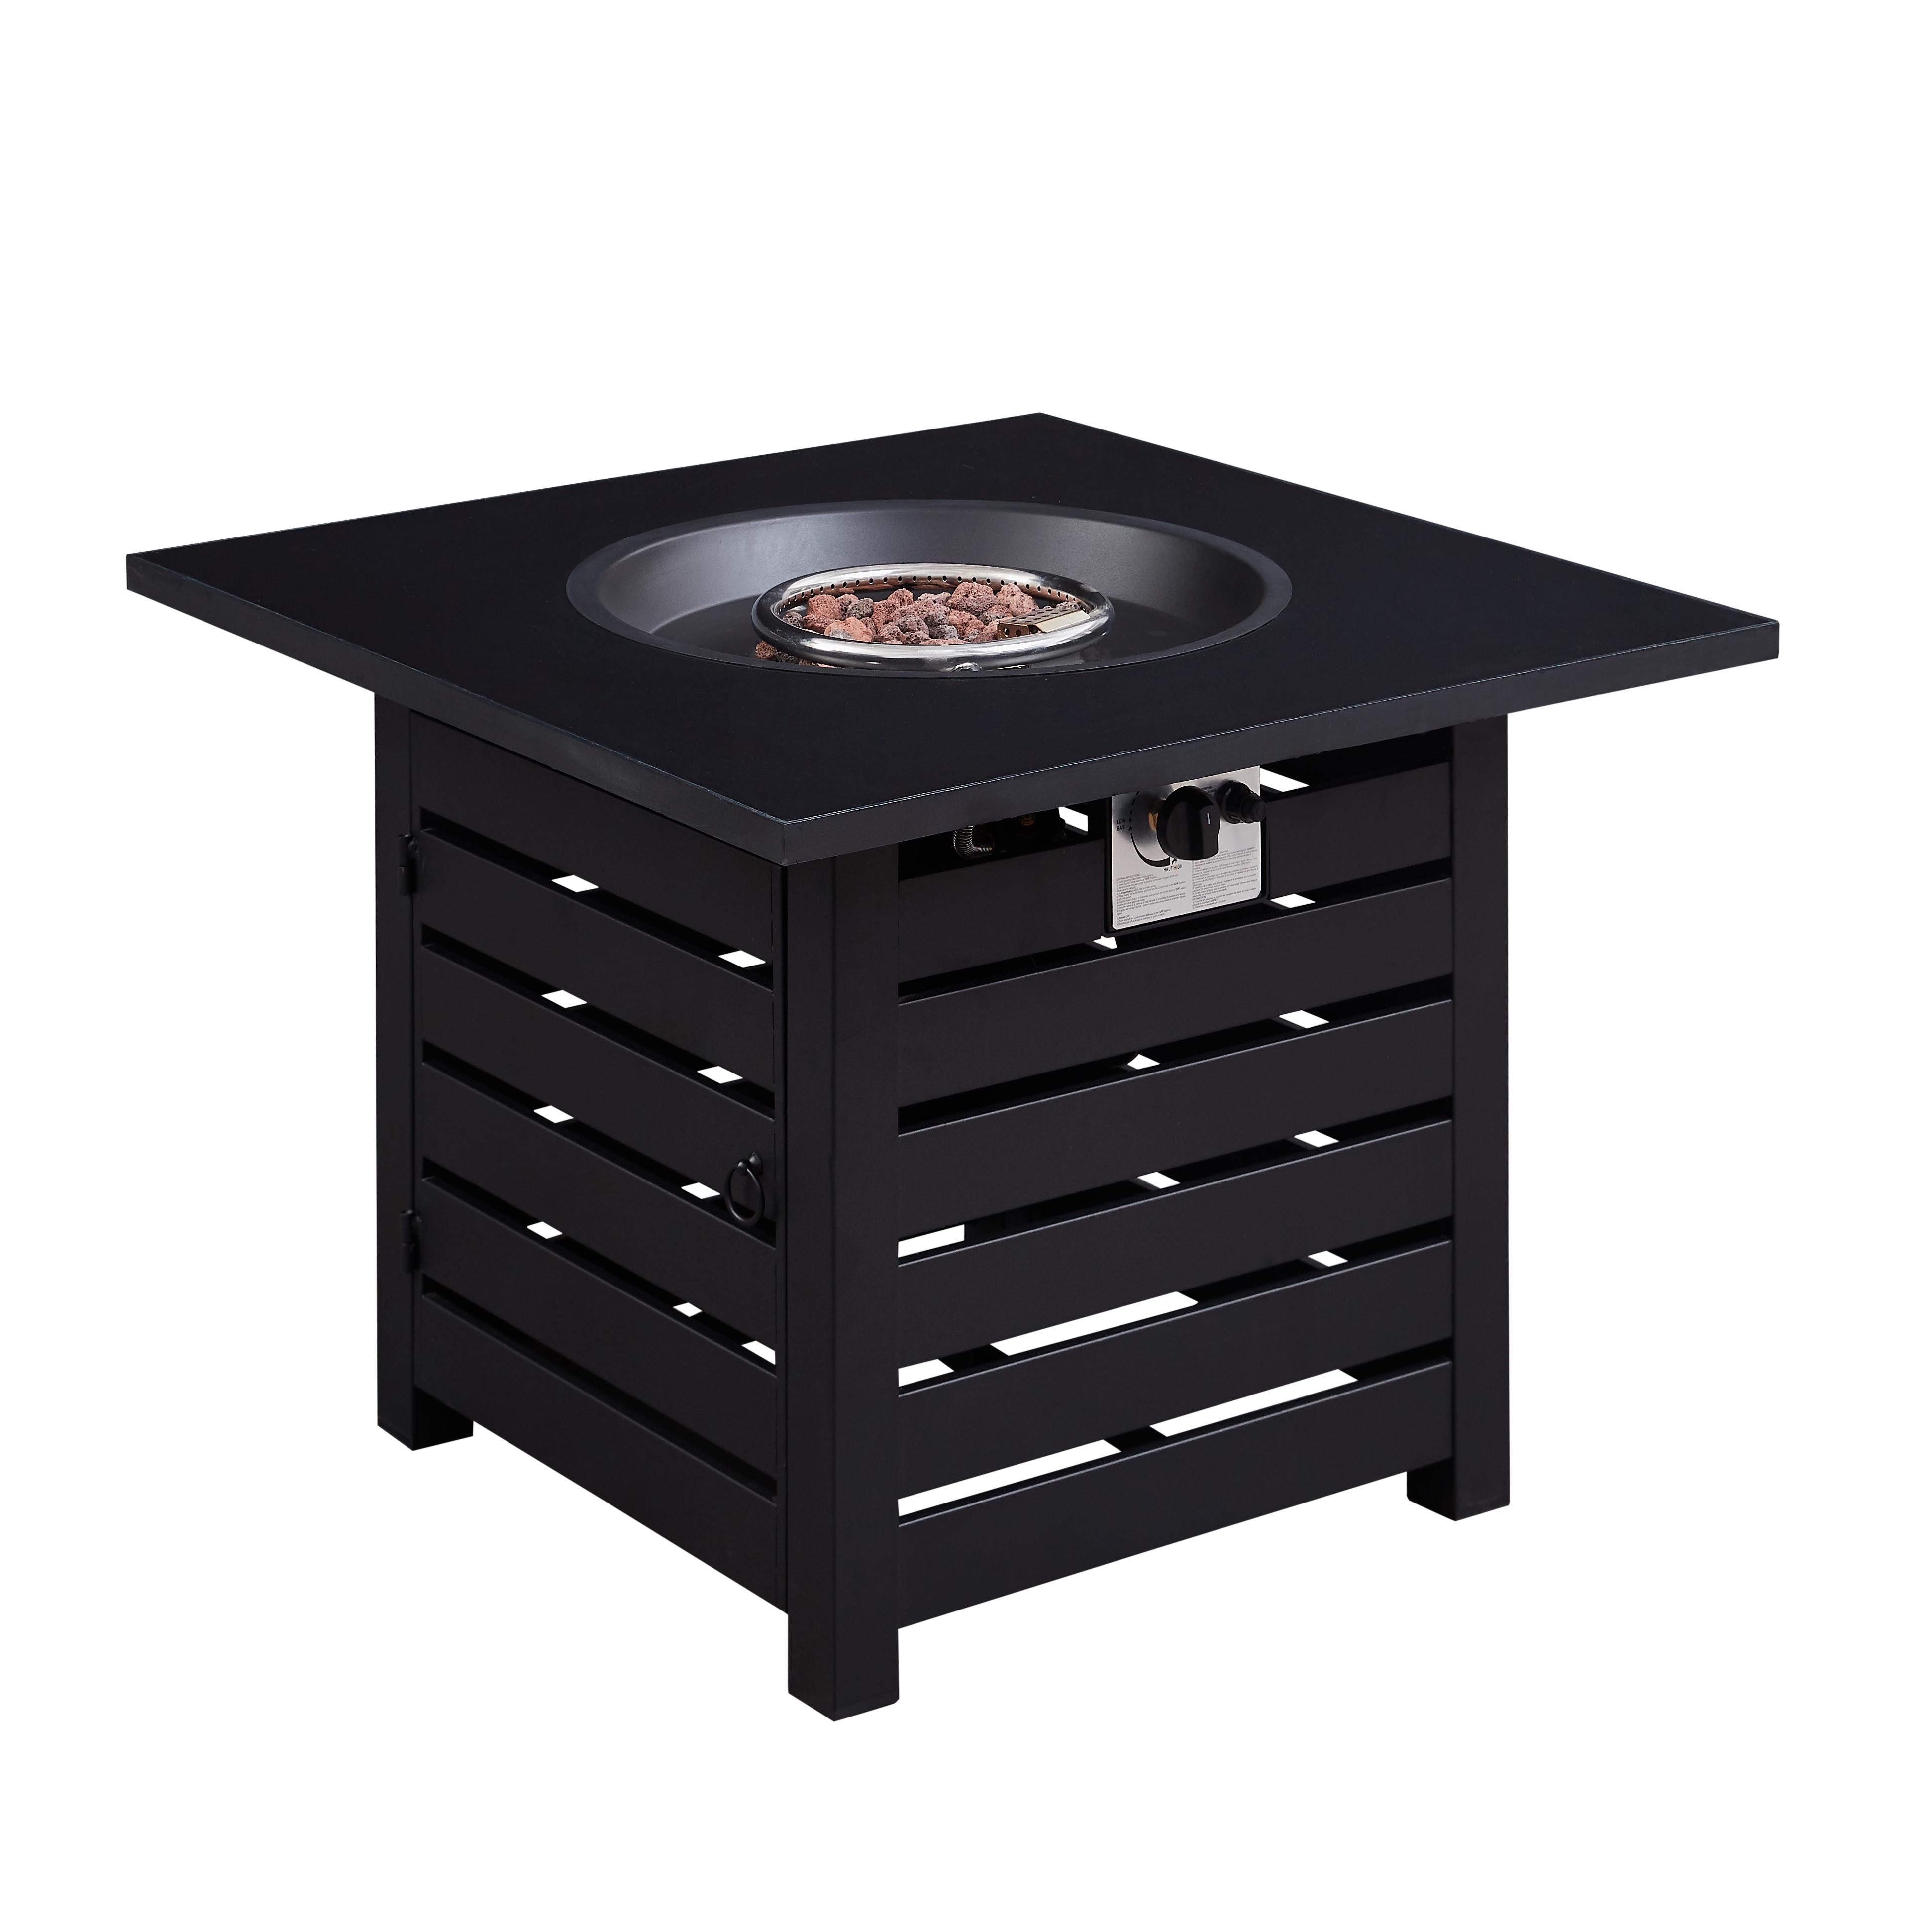 40,000 BTU Fire Pit Table Square Auto-Ignition Propane Gas Firepit 32-inch 